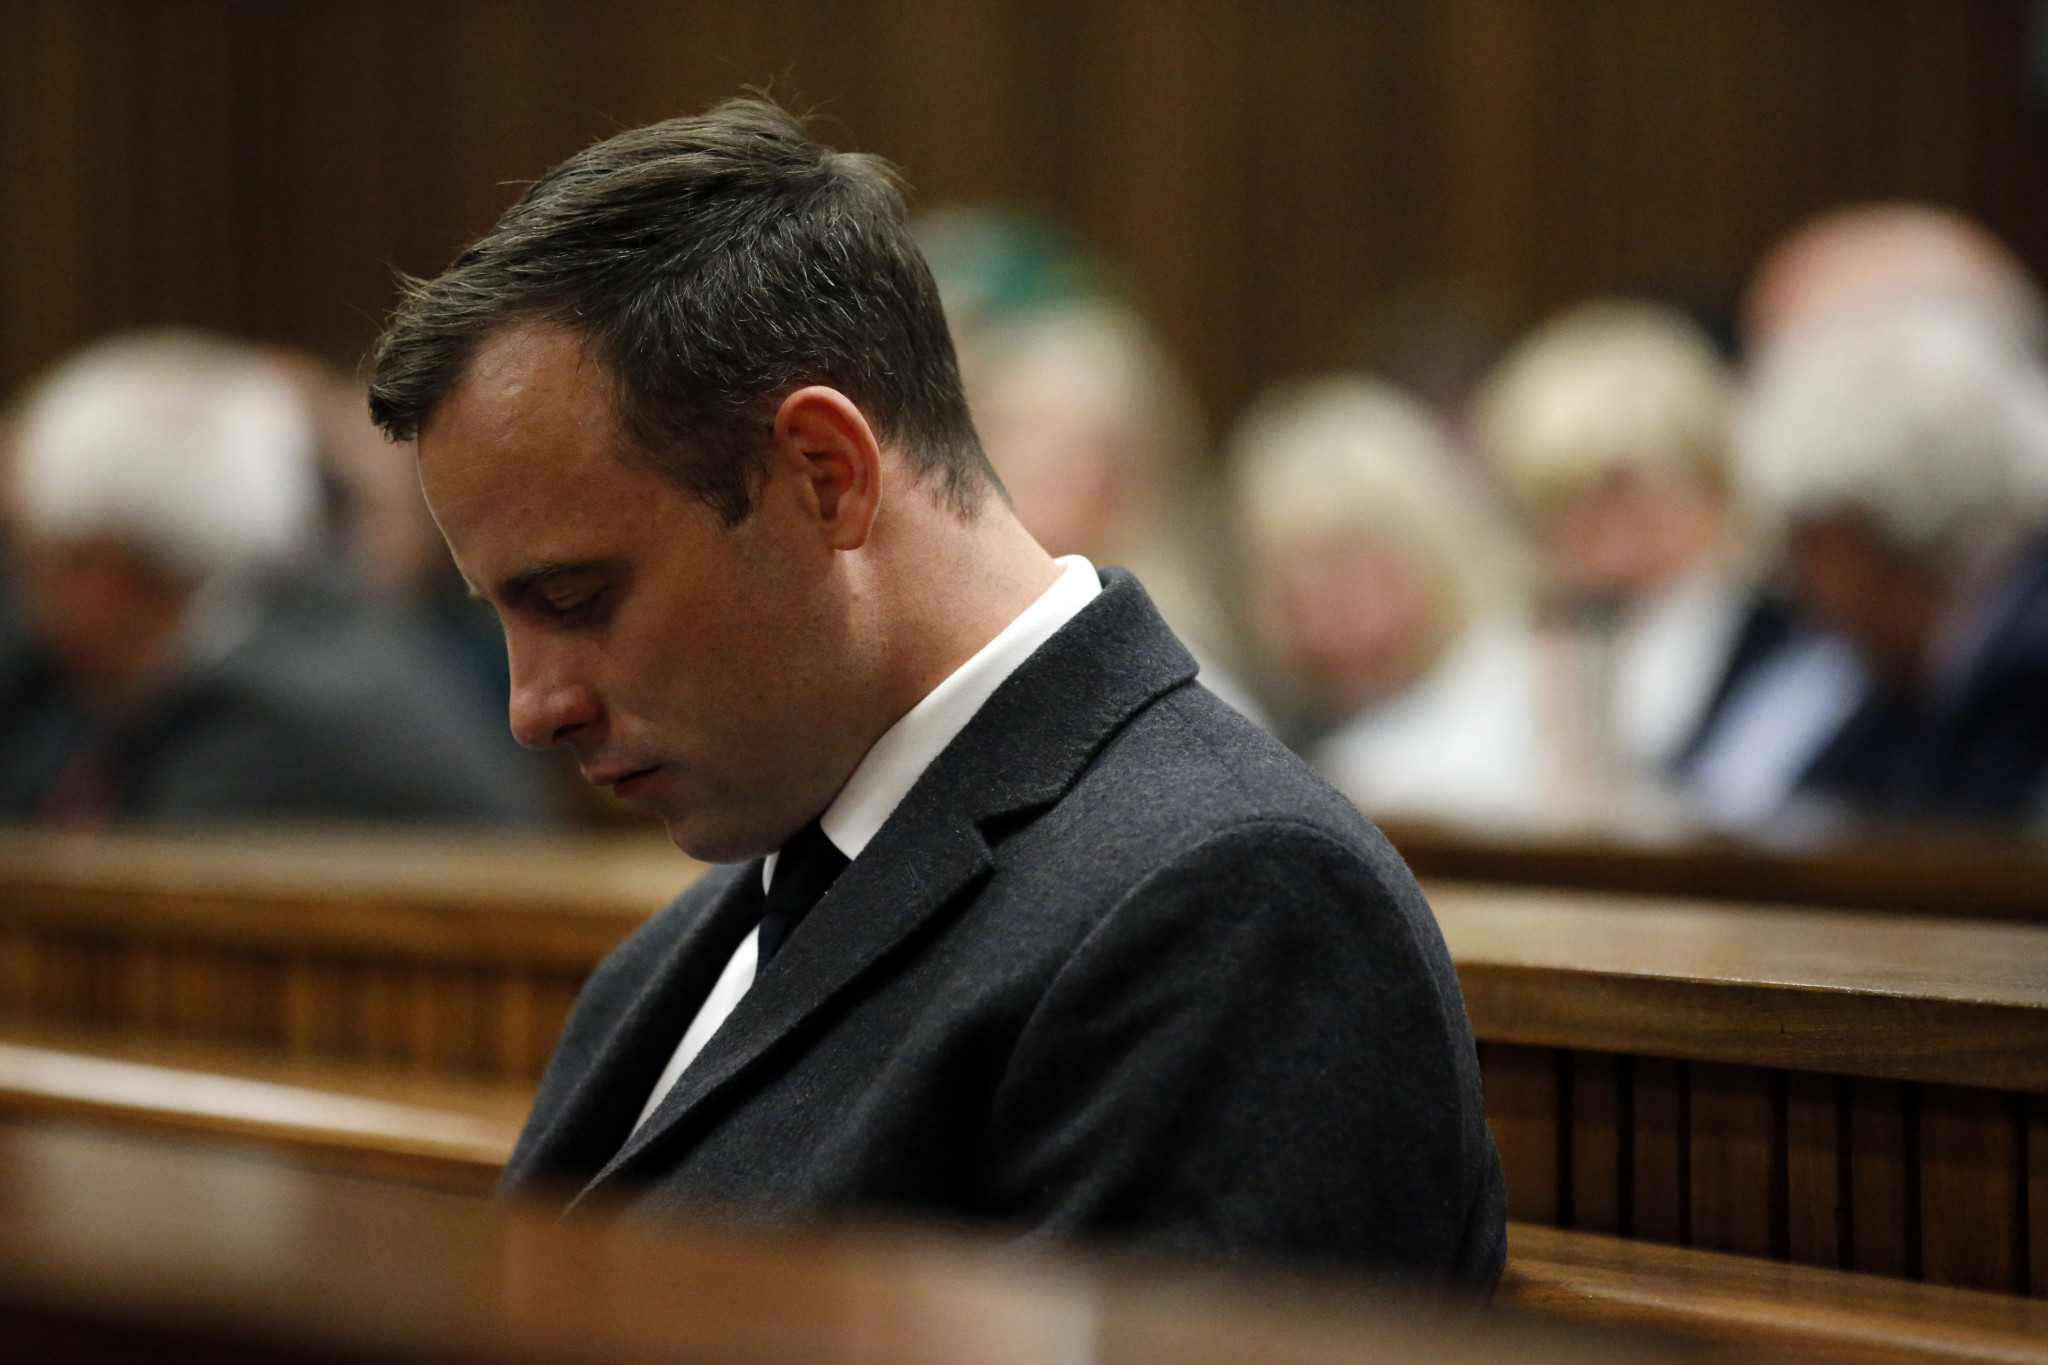 Pistorius seeks early release from prison in South Africa on parole